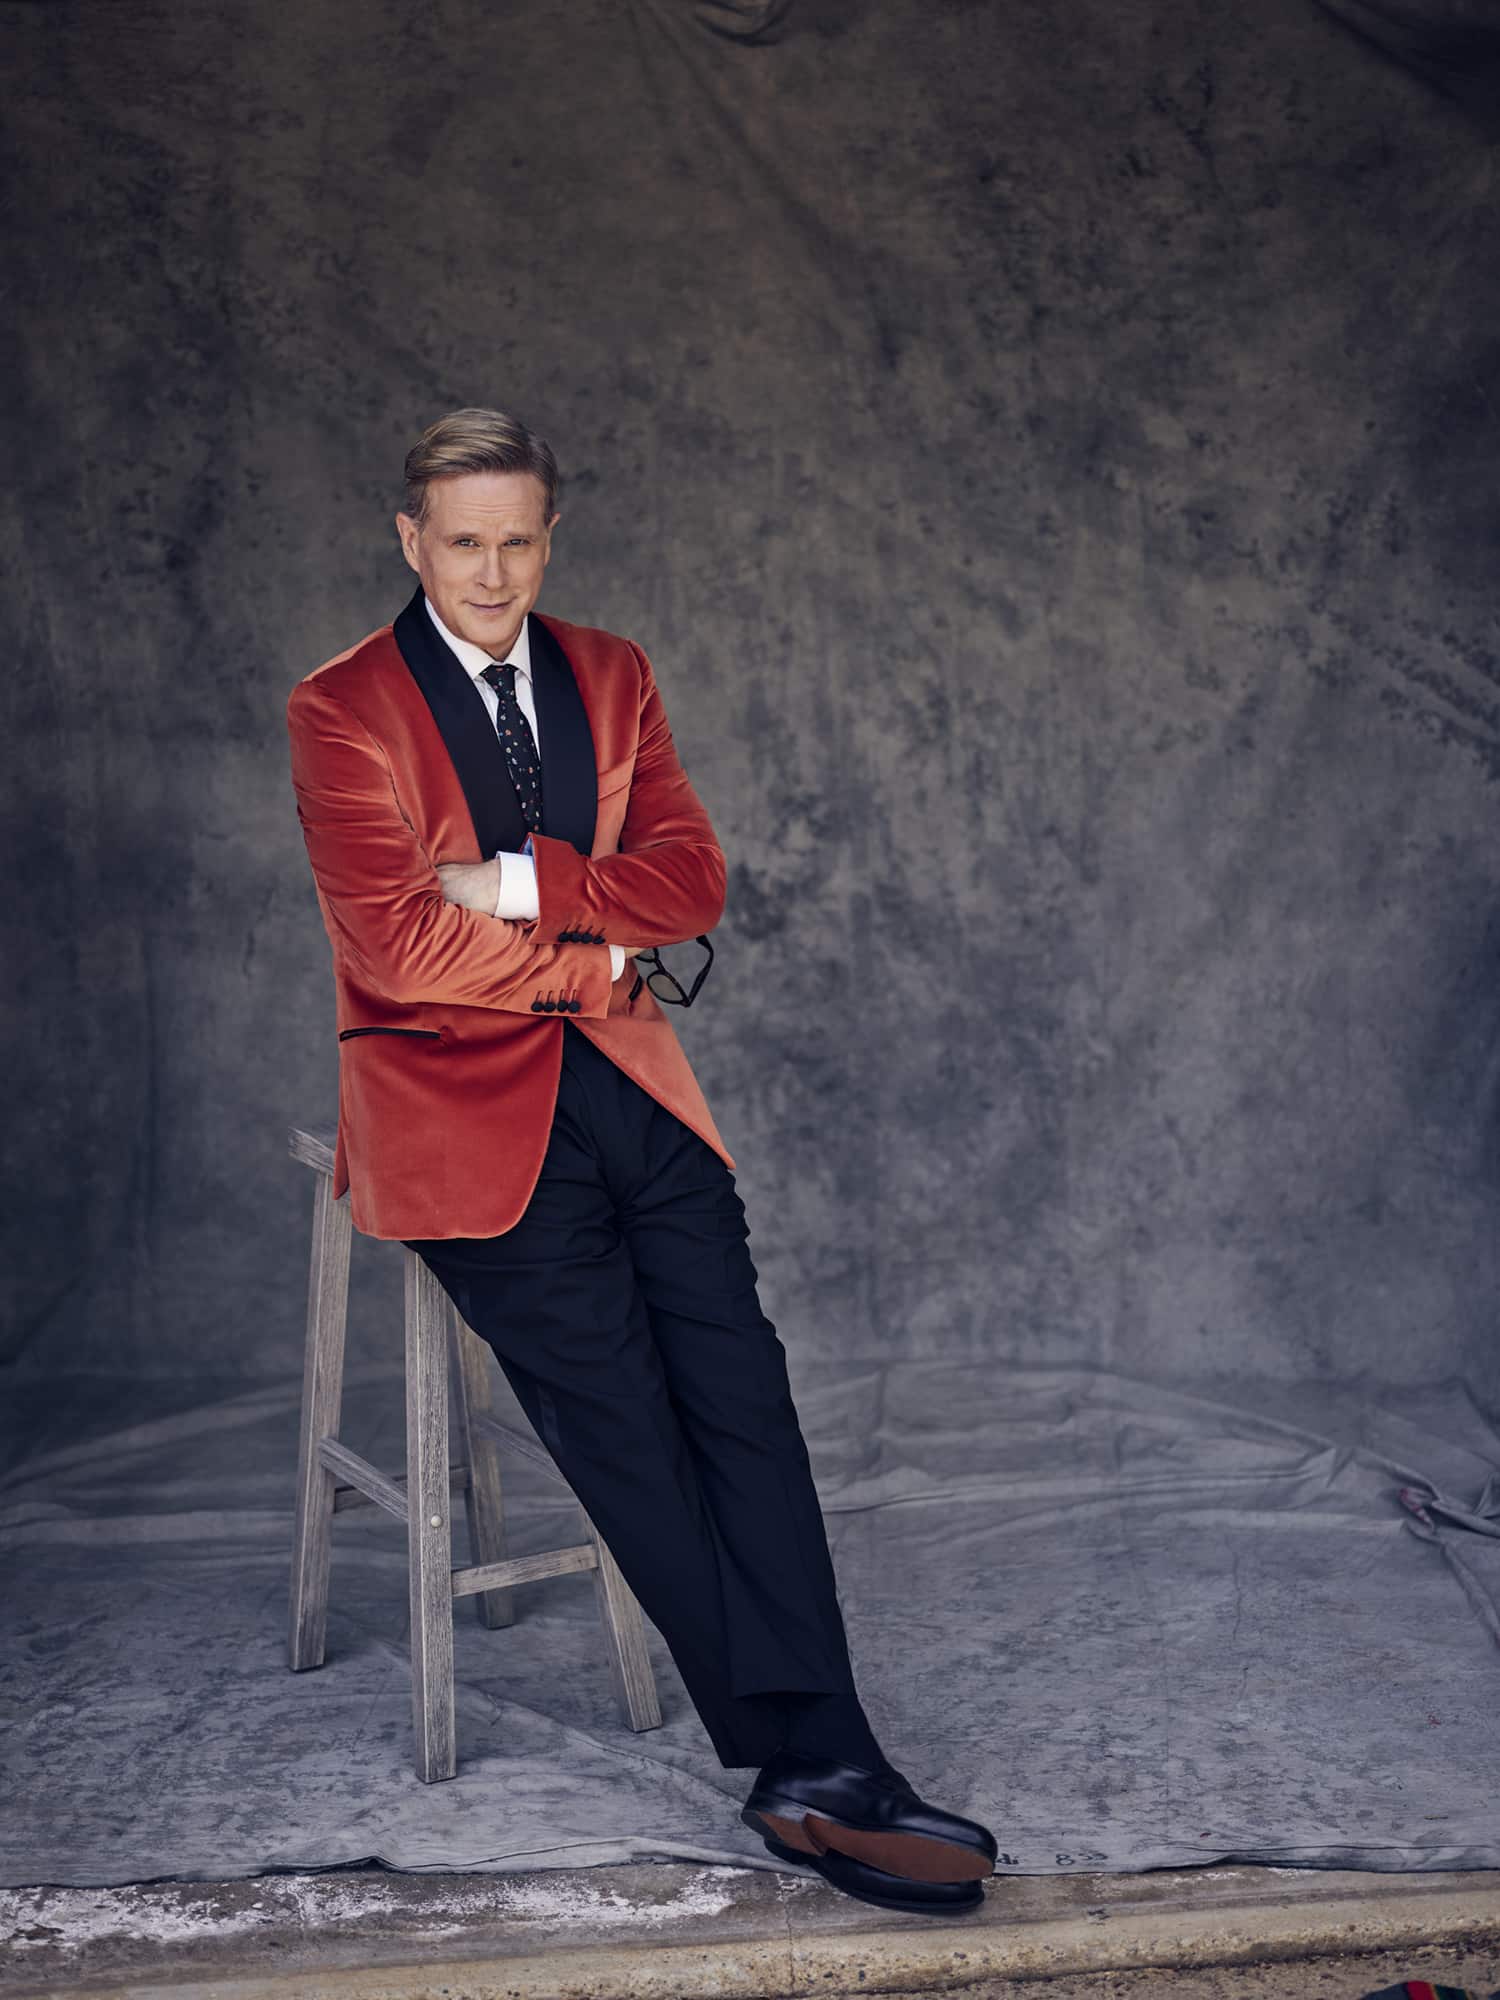 Cary wears vermilion velvet tux jacket, black tux pants, white shirt, floral tie, all by PAUL SMITH. Sunglasses by JACQUES MARIE MAGE. Shoes by JOHN LOBB. // 📸 : Kurt Iswarienko